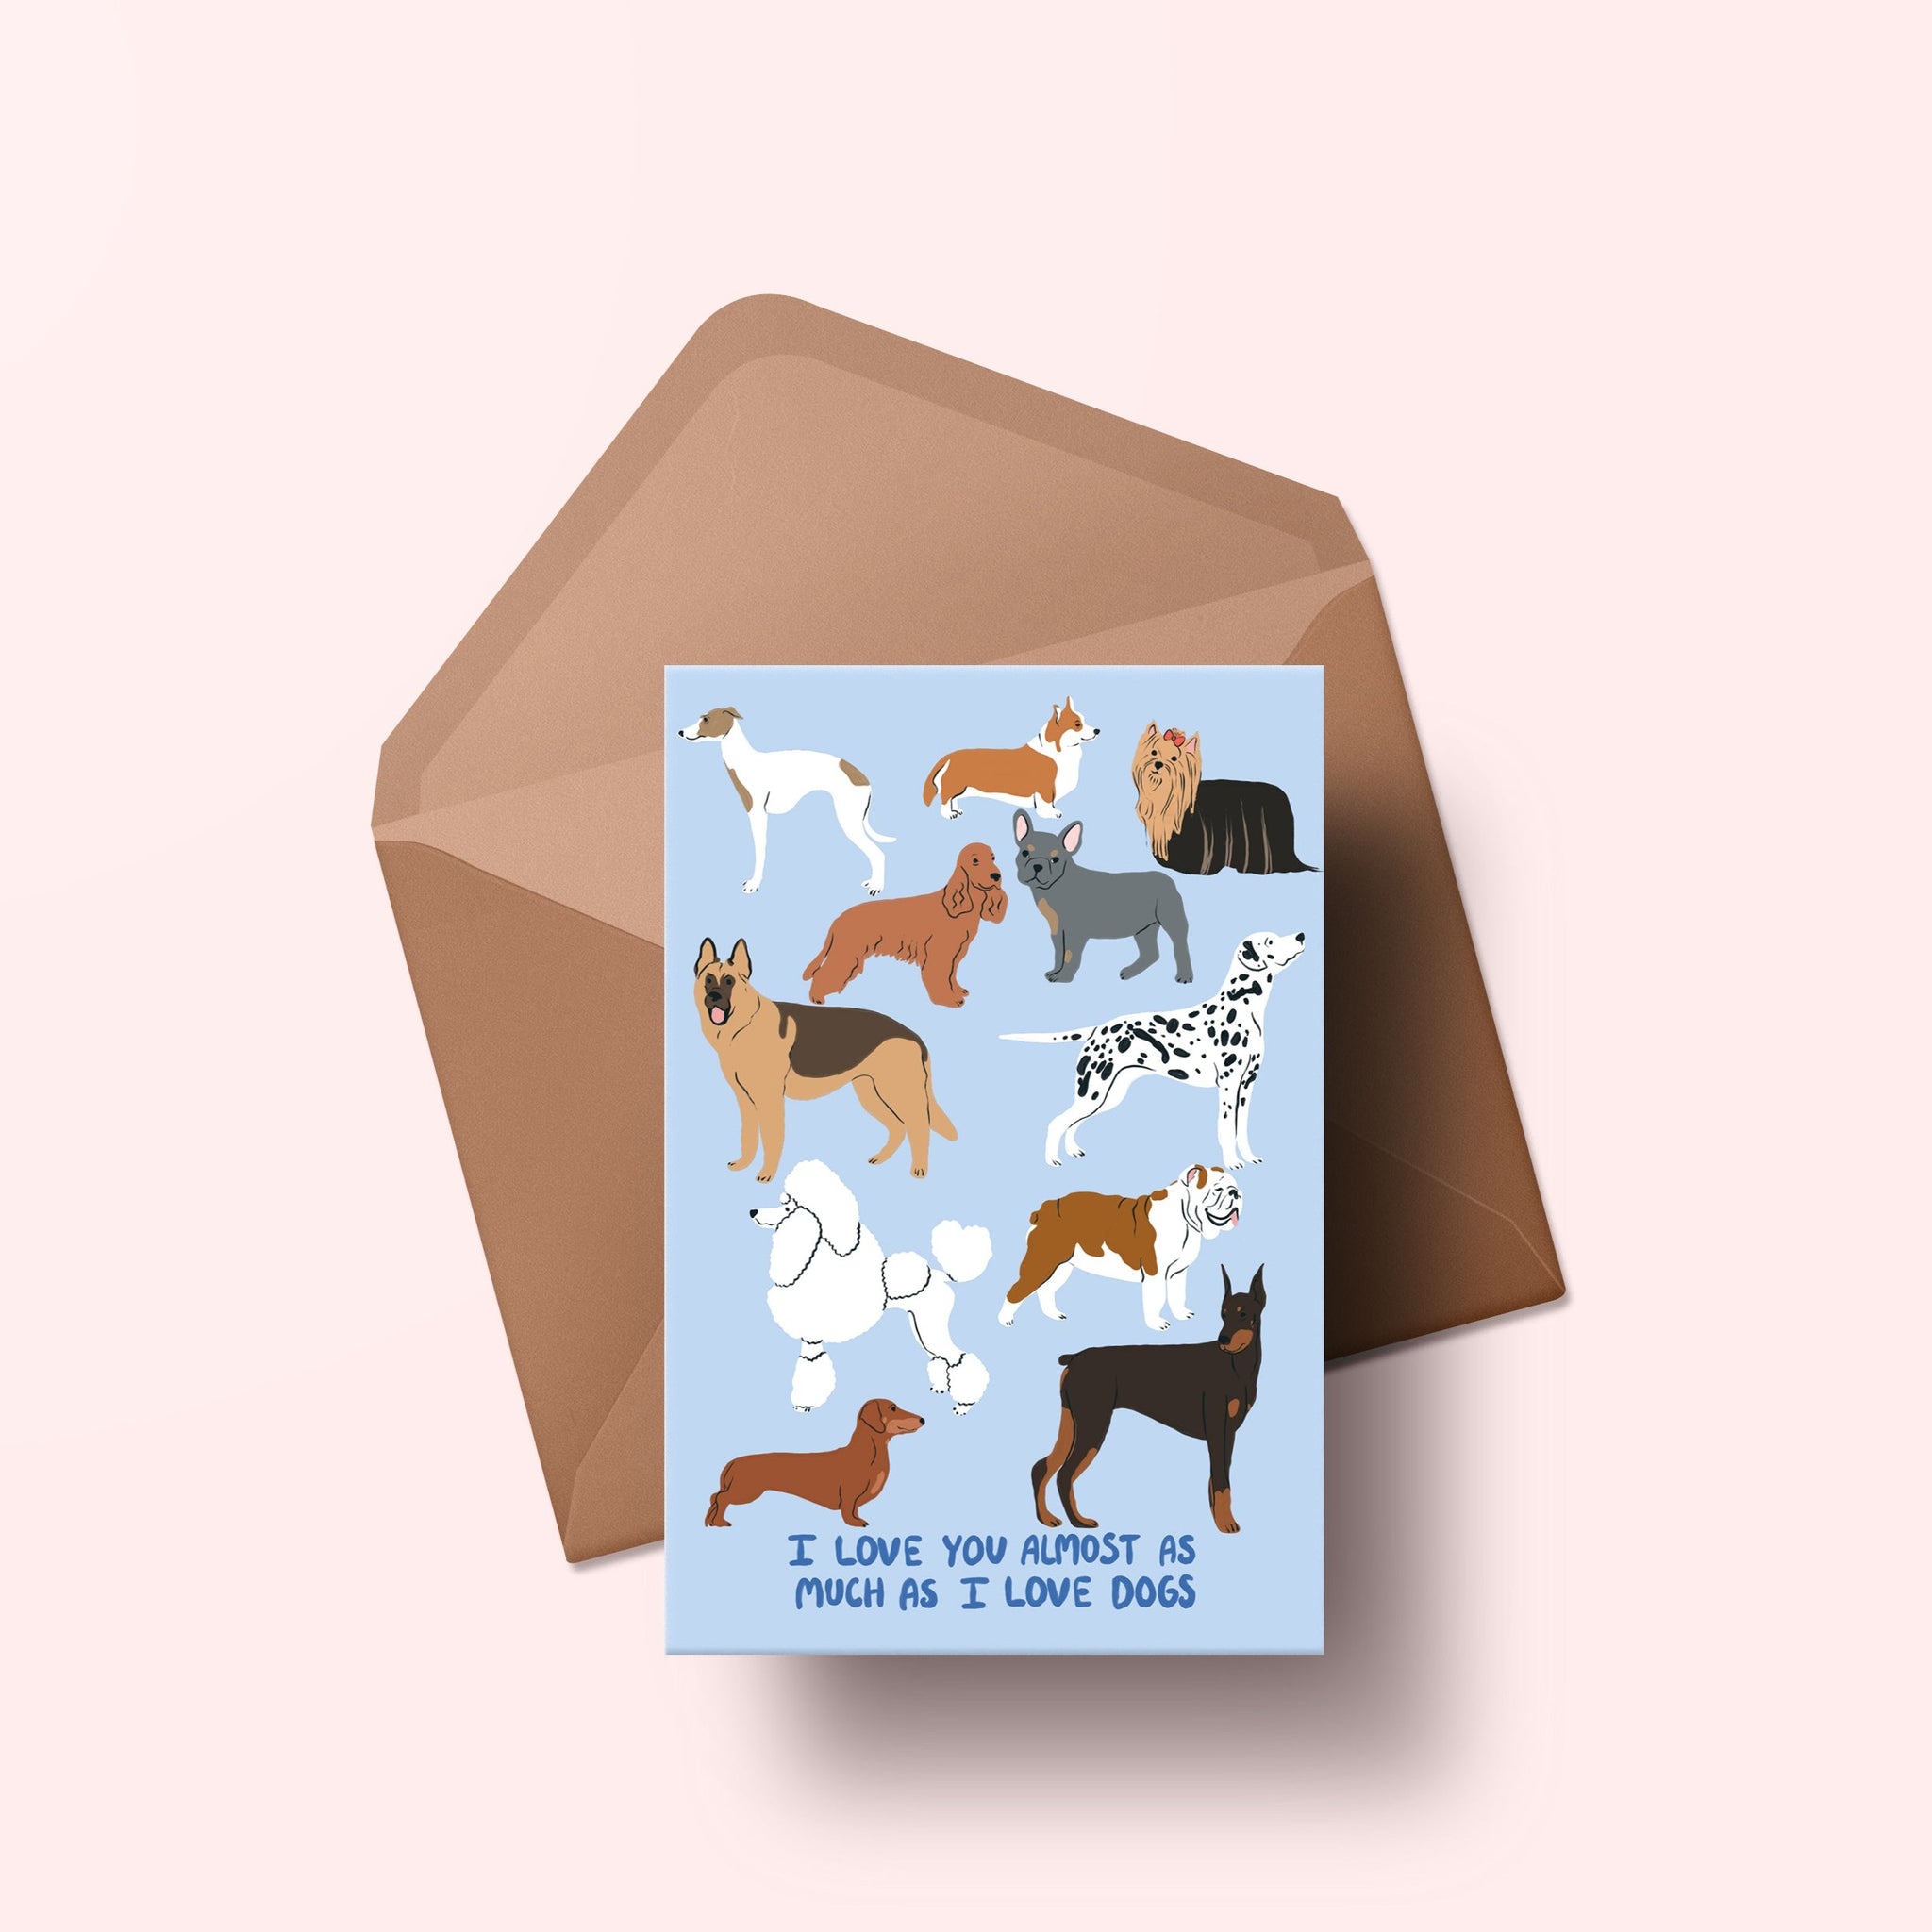 image of a greetings card featuring an illustration of lots of dogs with handwritten text 'I love you almost as much as I love dogs'  The background of the card is a light blue and on top of a recycled kraft material.